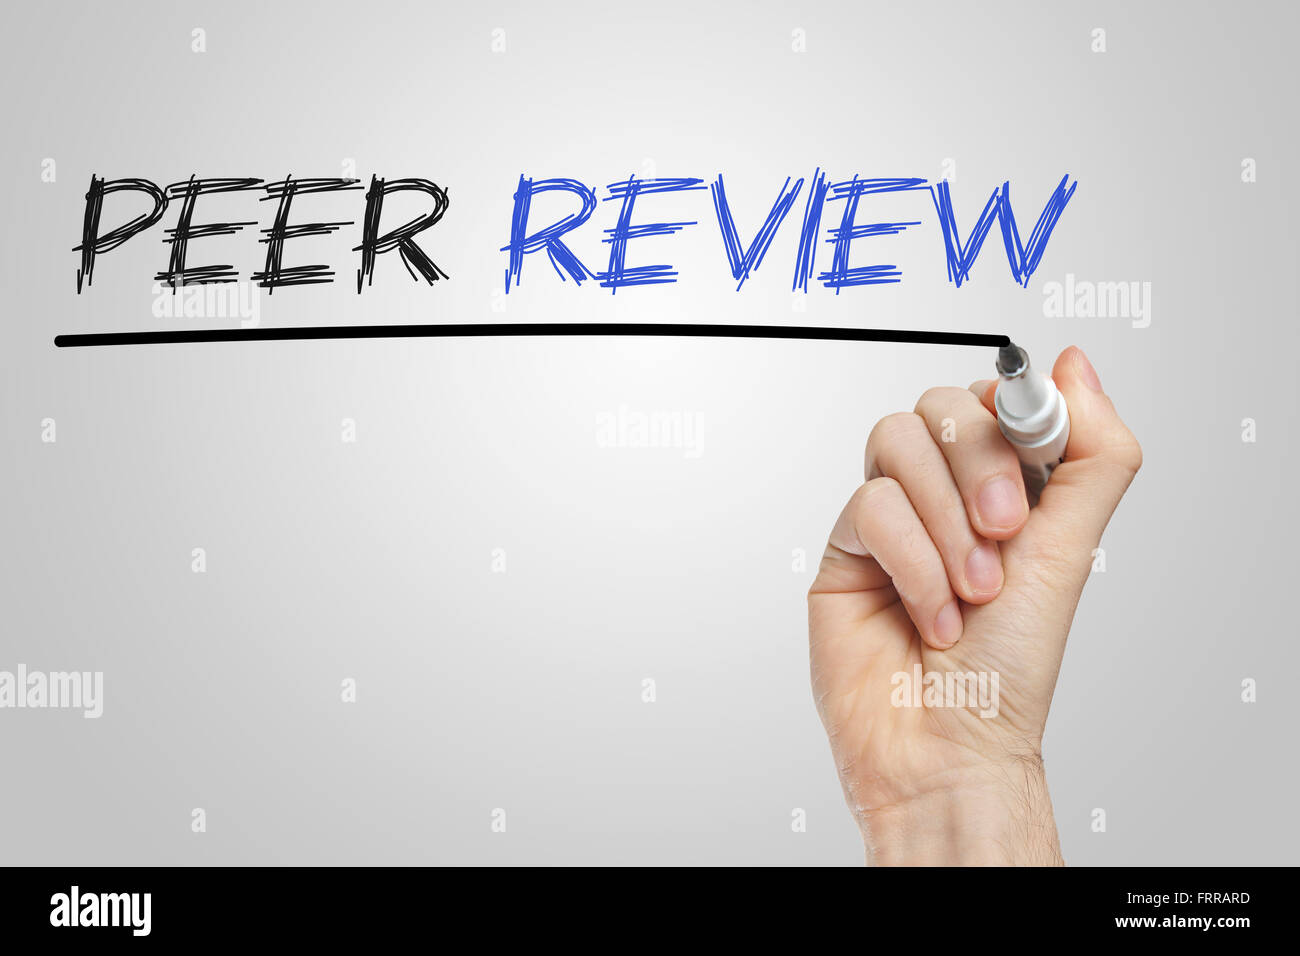 Peer review written on a white board Stock Photo